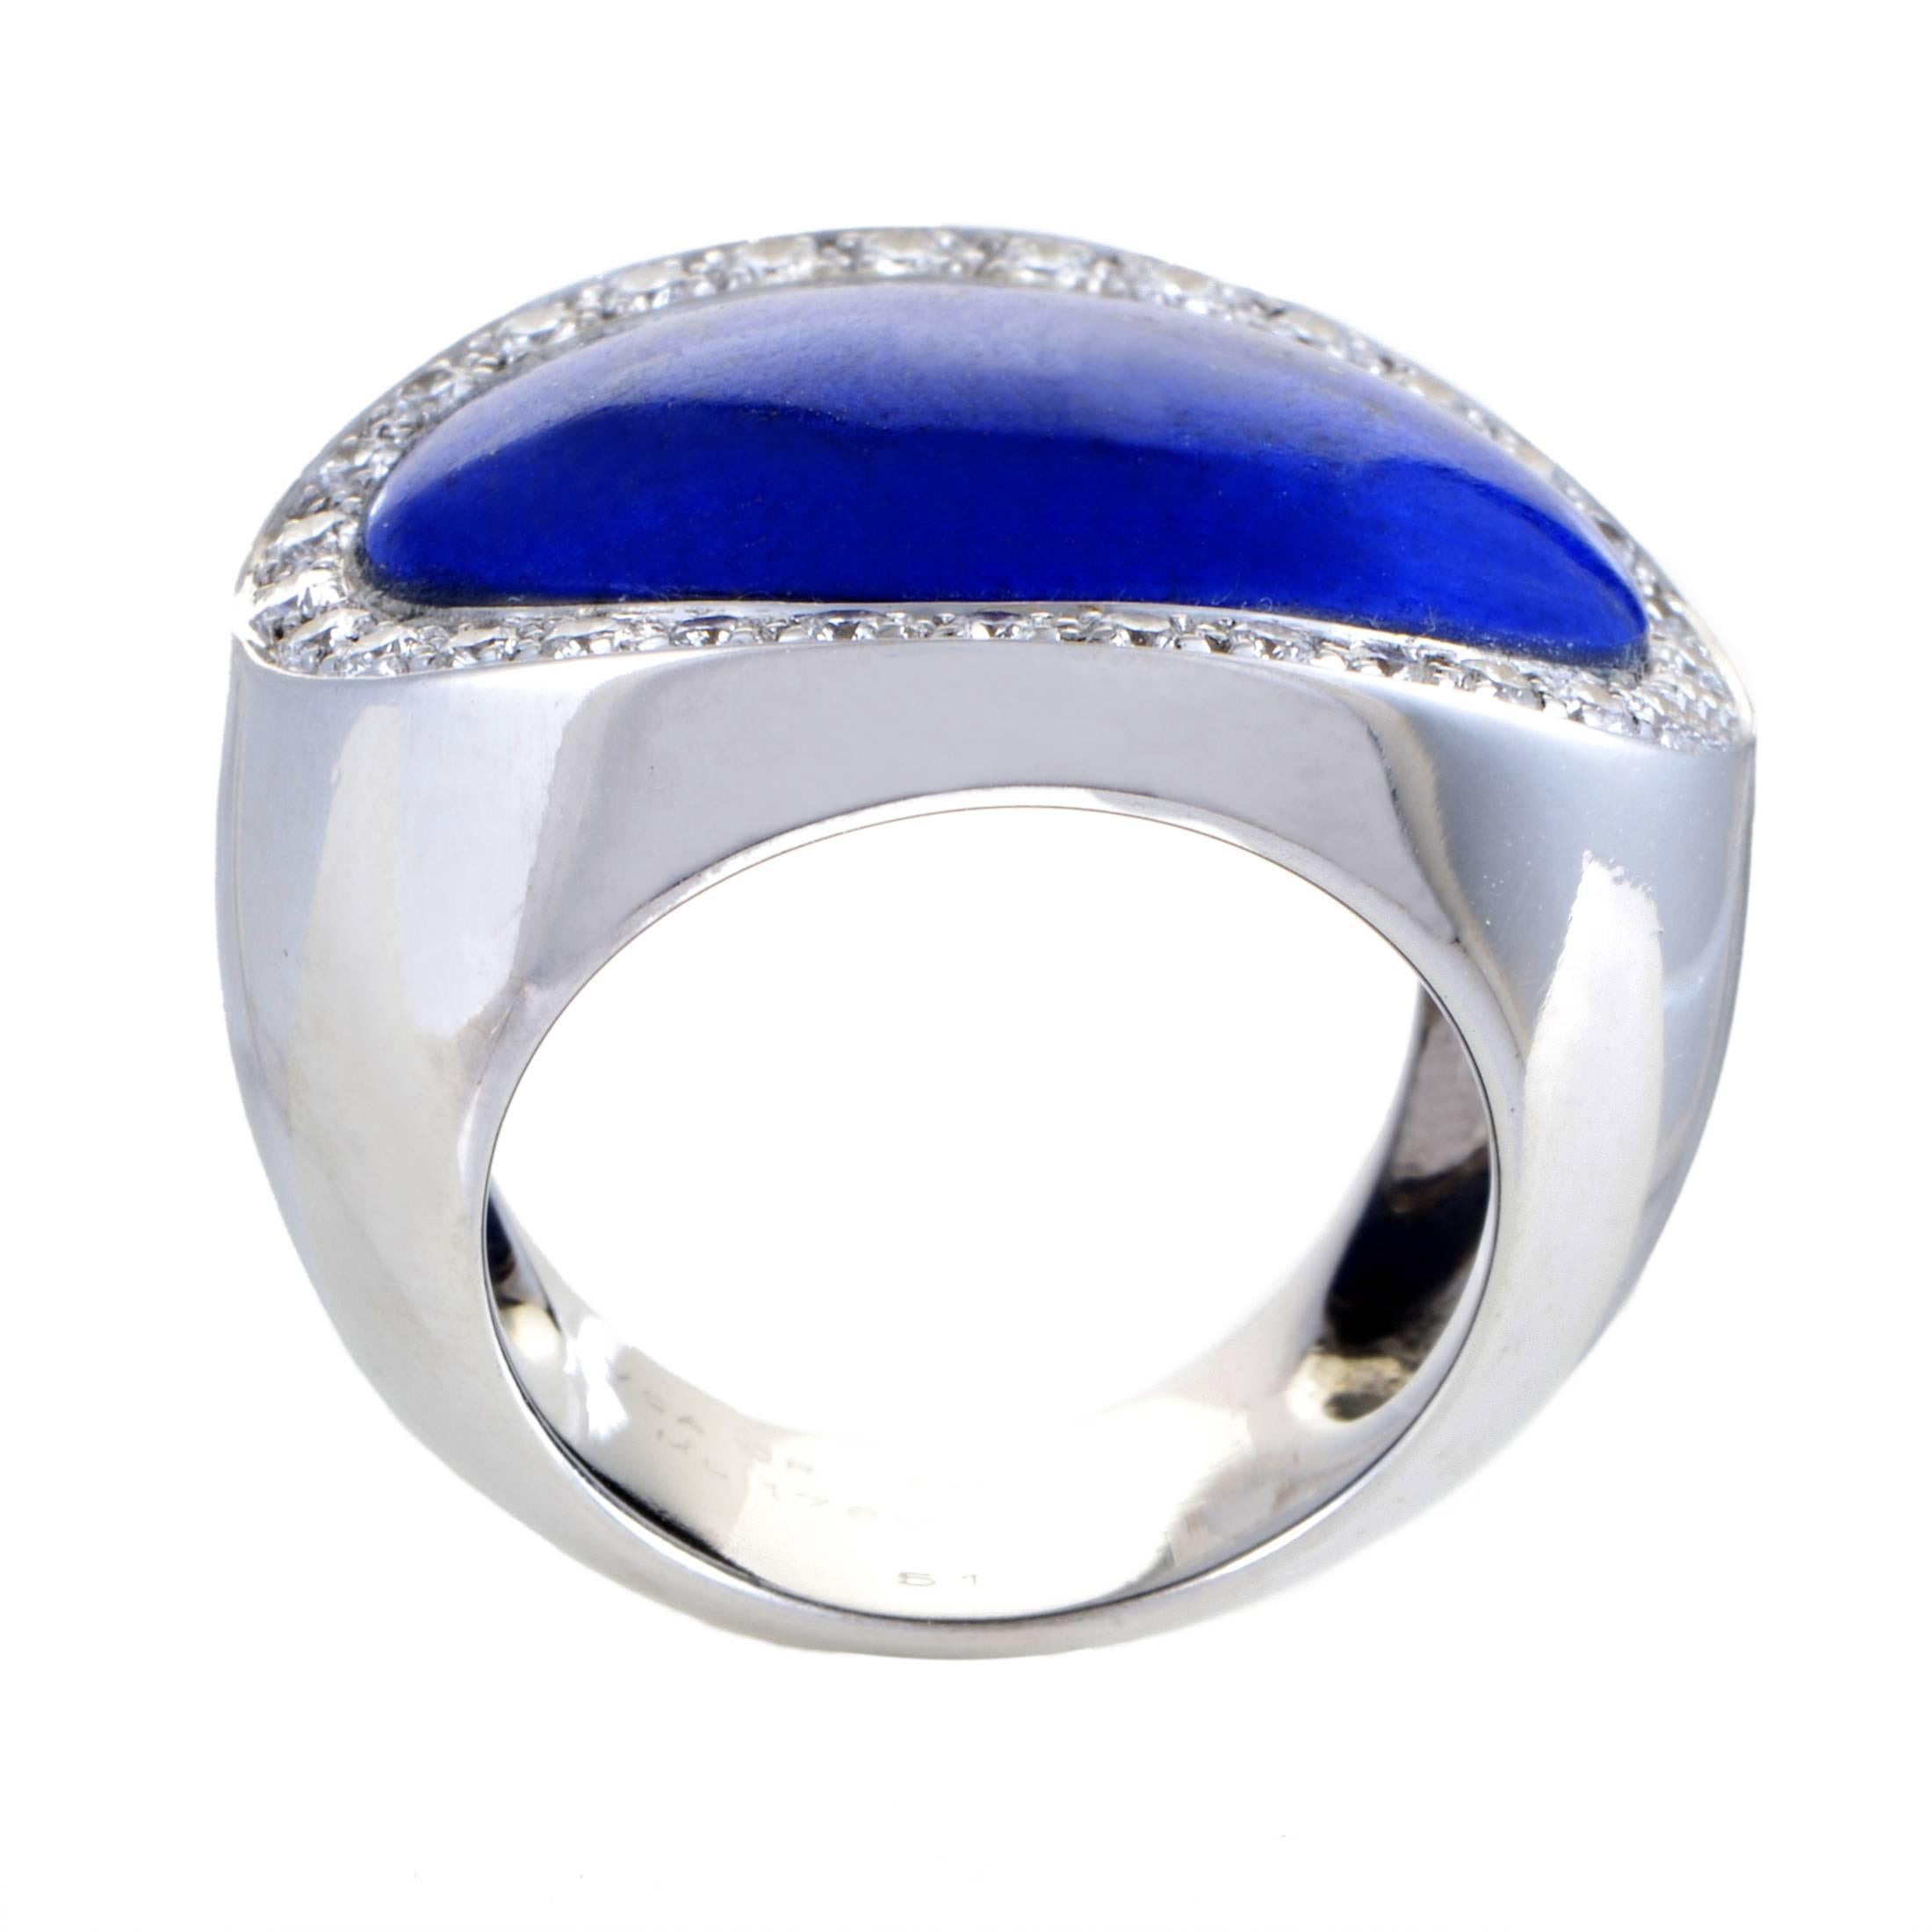 In keeping with the spotlessly polished surface of 18K white gold, the splendid Lapis Lazuli in this marvelous ring from Van Cleef & Arpels also boasts an immaculate gleam, brought out in brilliant fashion by the sparkling diamonds around it